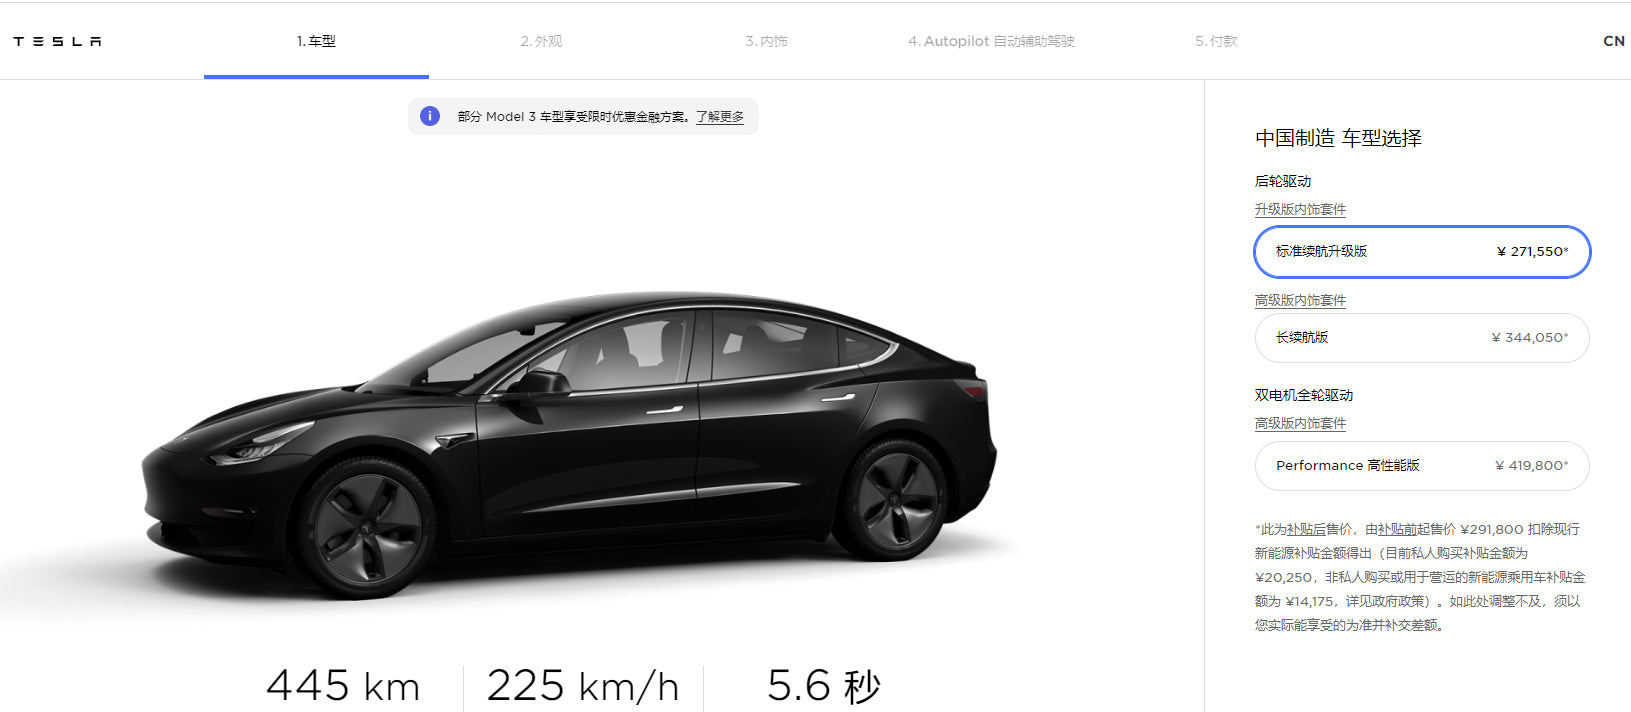 Tesla China Announced New Model 3 Sr Pricing For New Nev Subsidy Regu